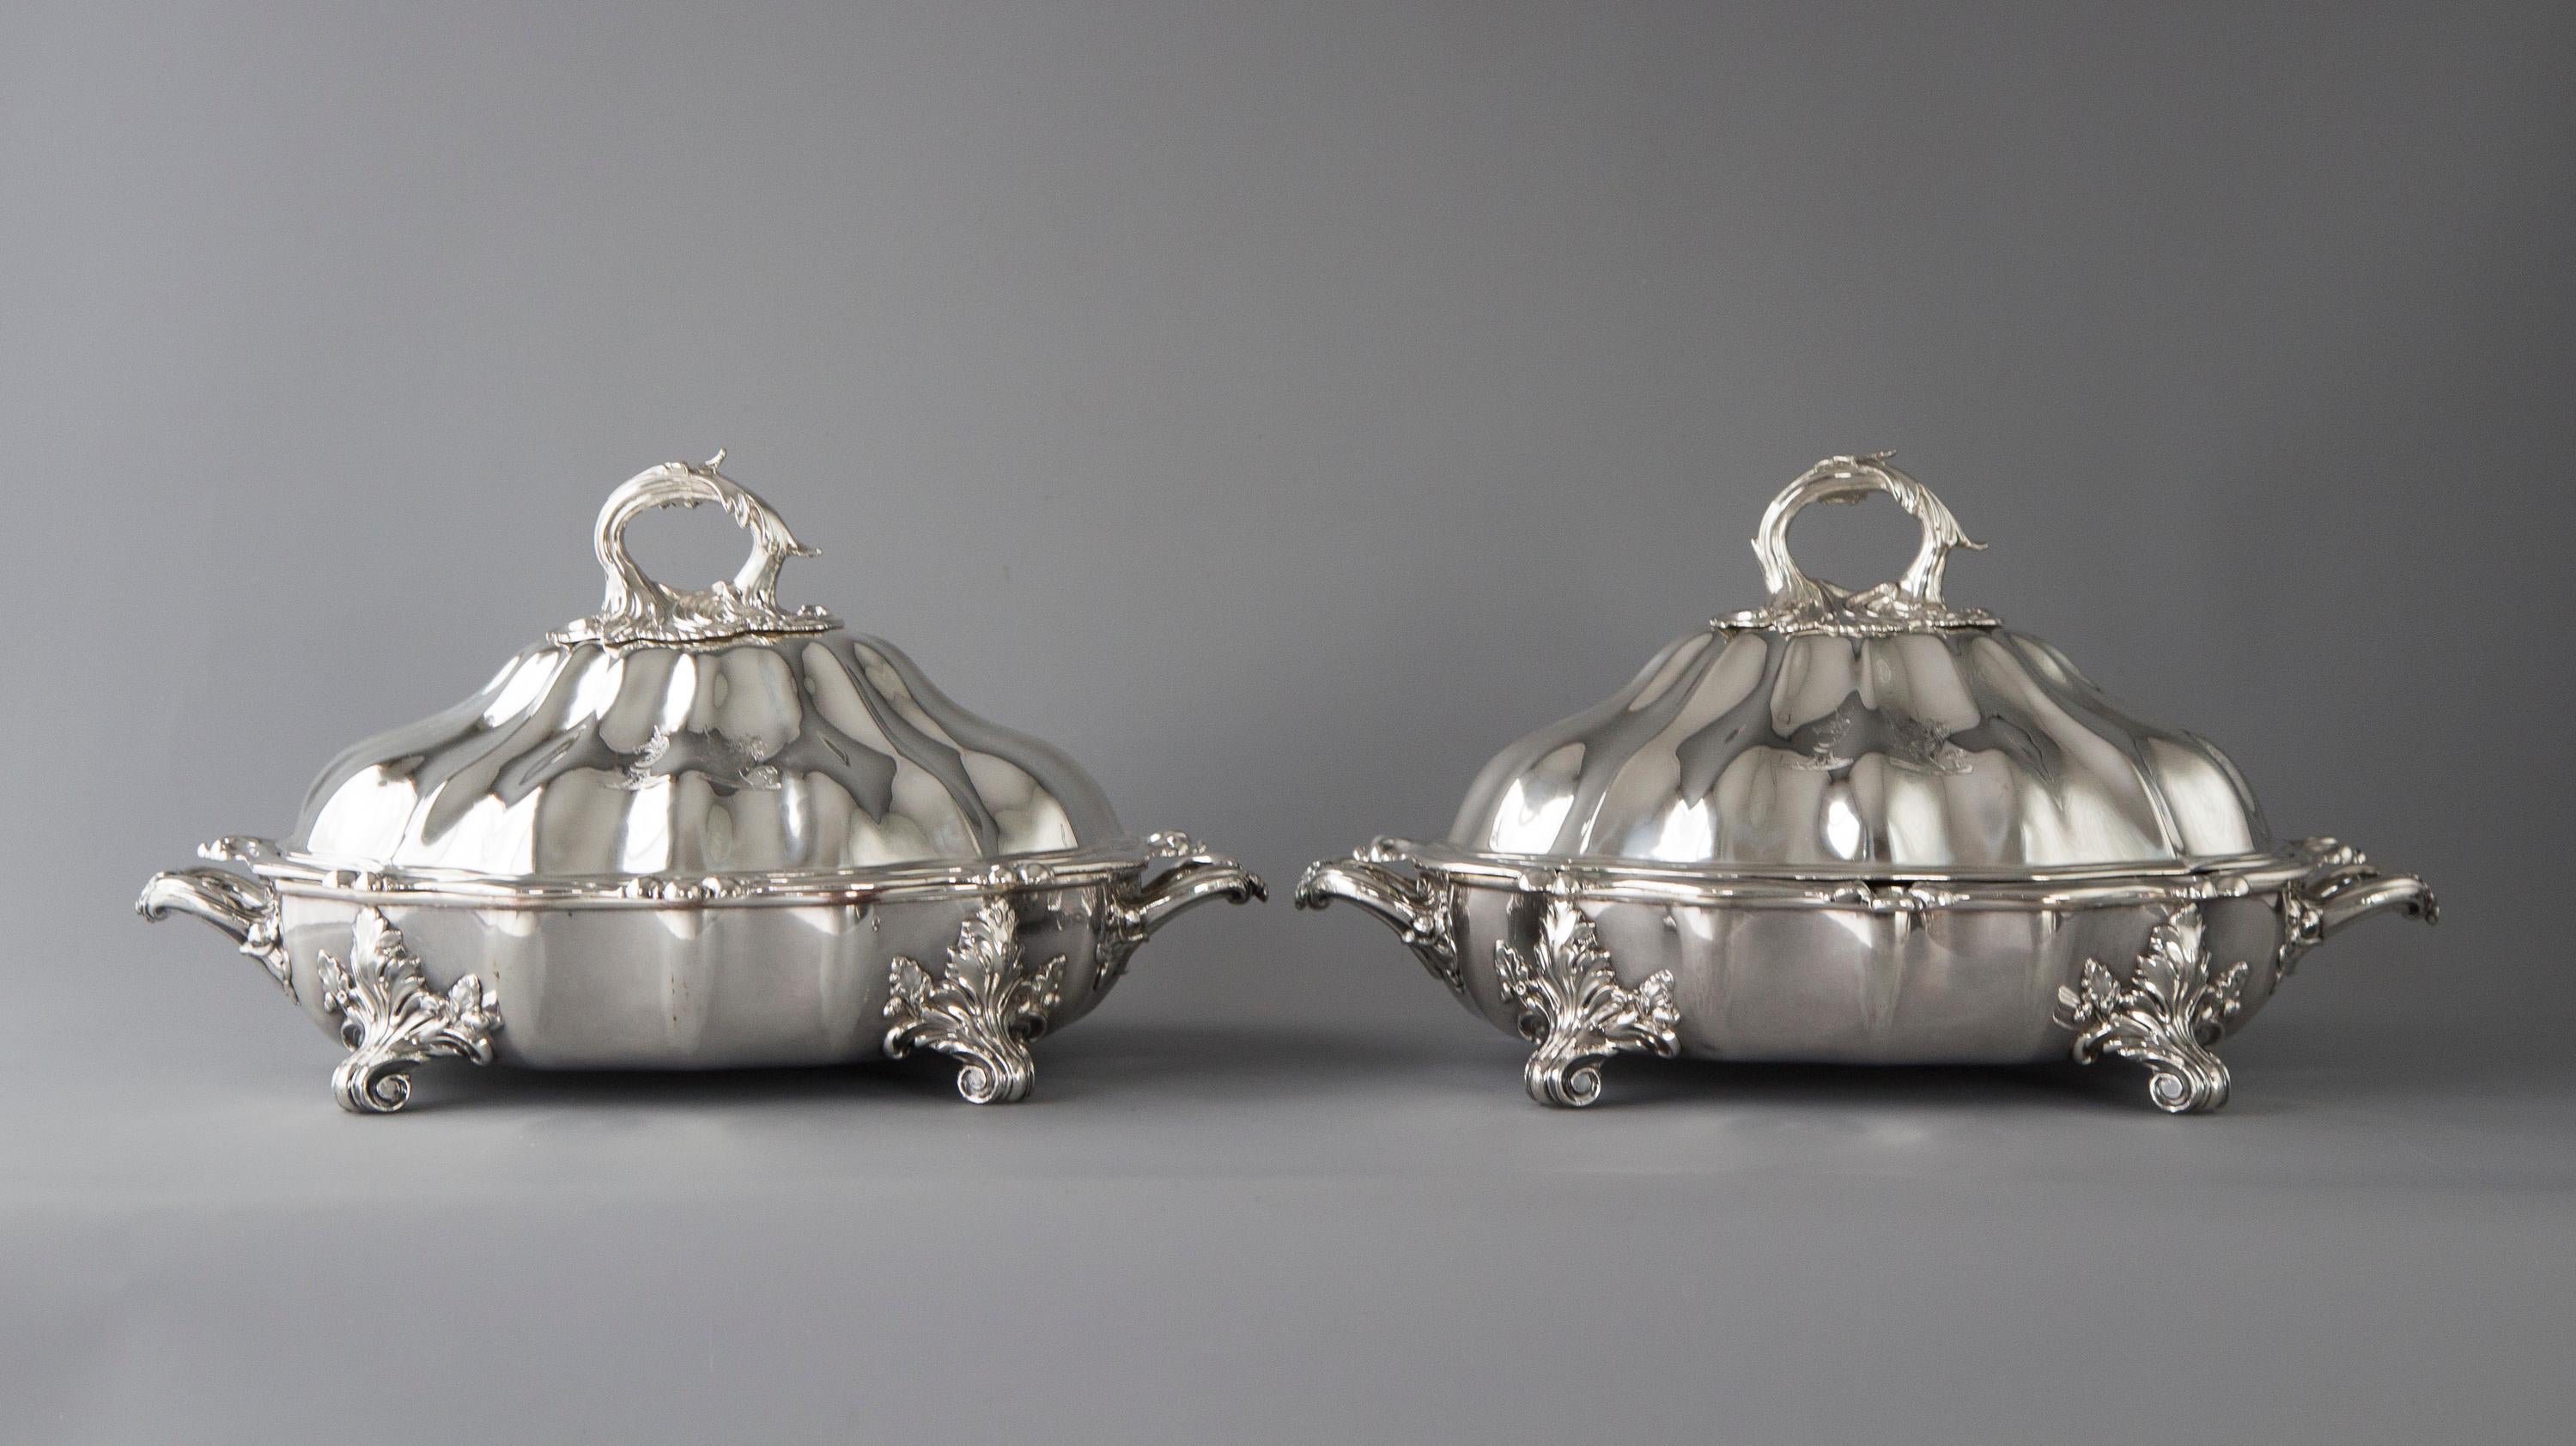 This superb pair of vegetable tureens or large entree dishes are of shaped, raised and fluted lobed form, surmounted with removable acanthus handles.
The lid is engraved to both sides with two crests (see pictures). The original plated warming